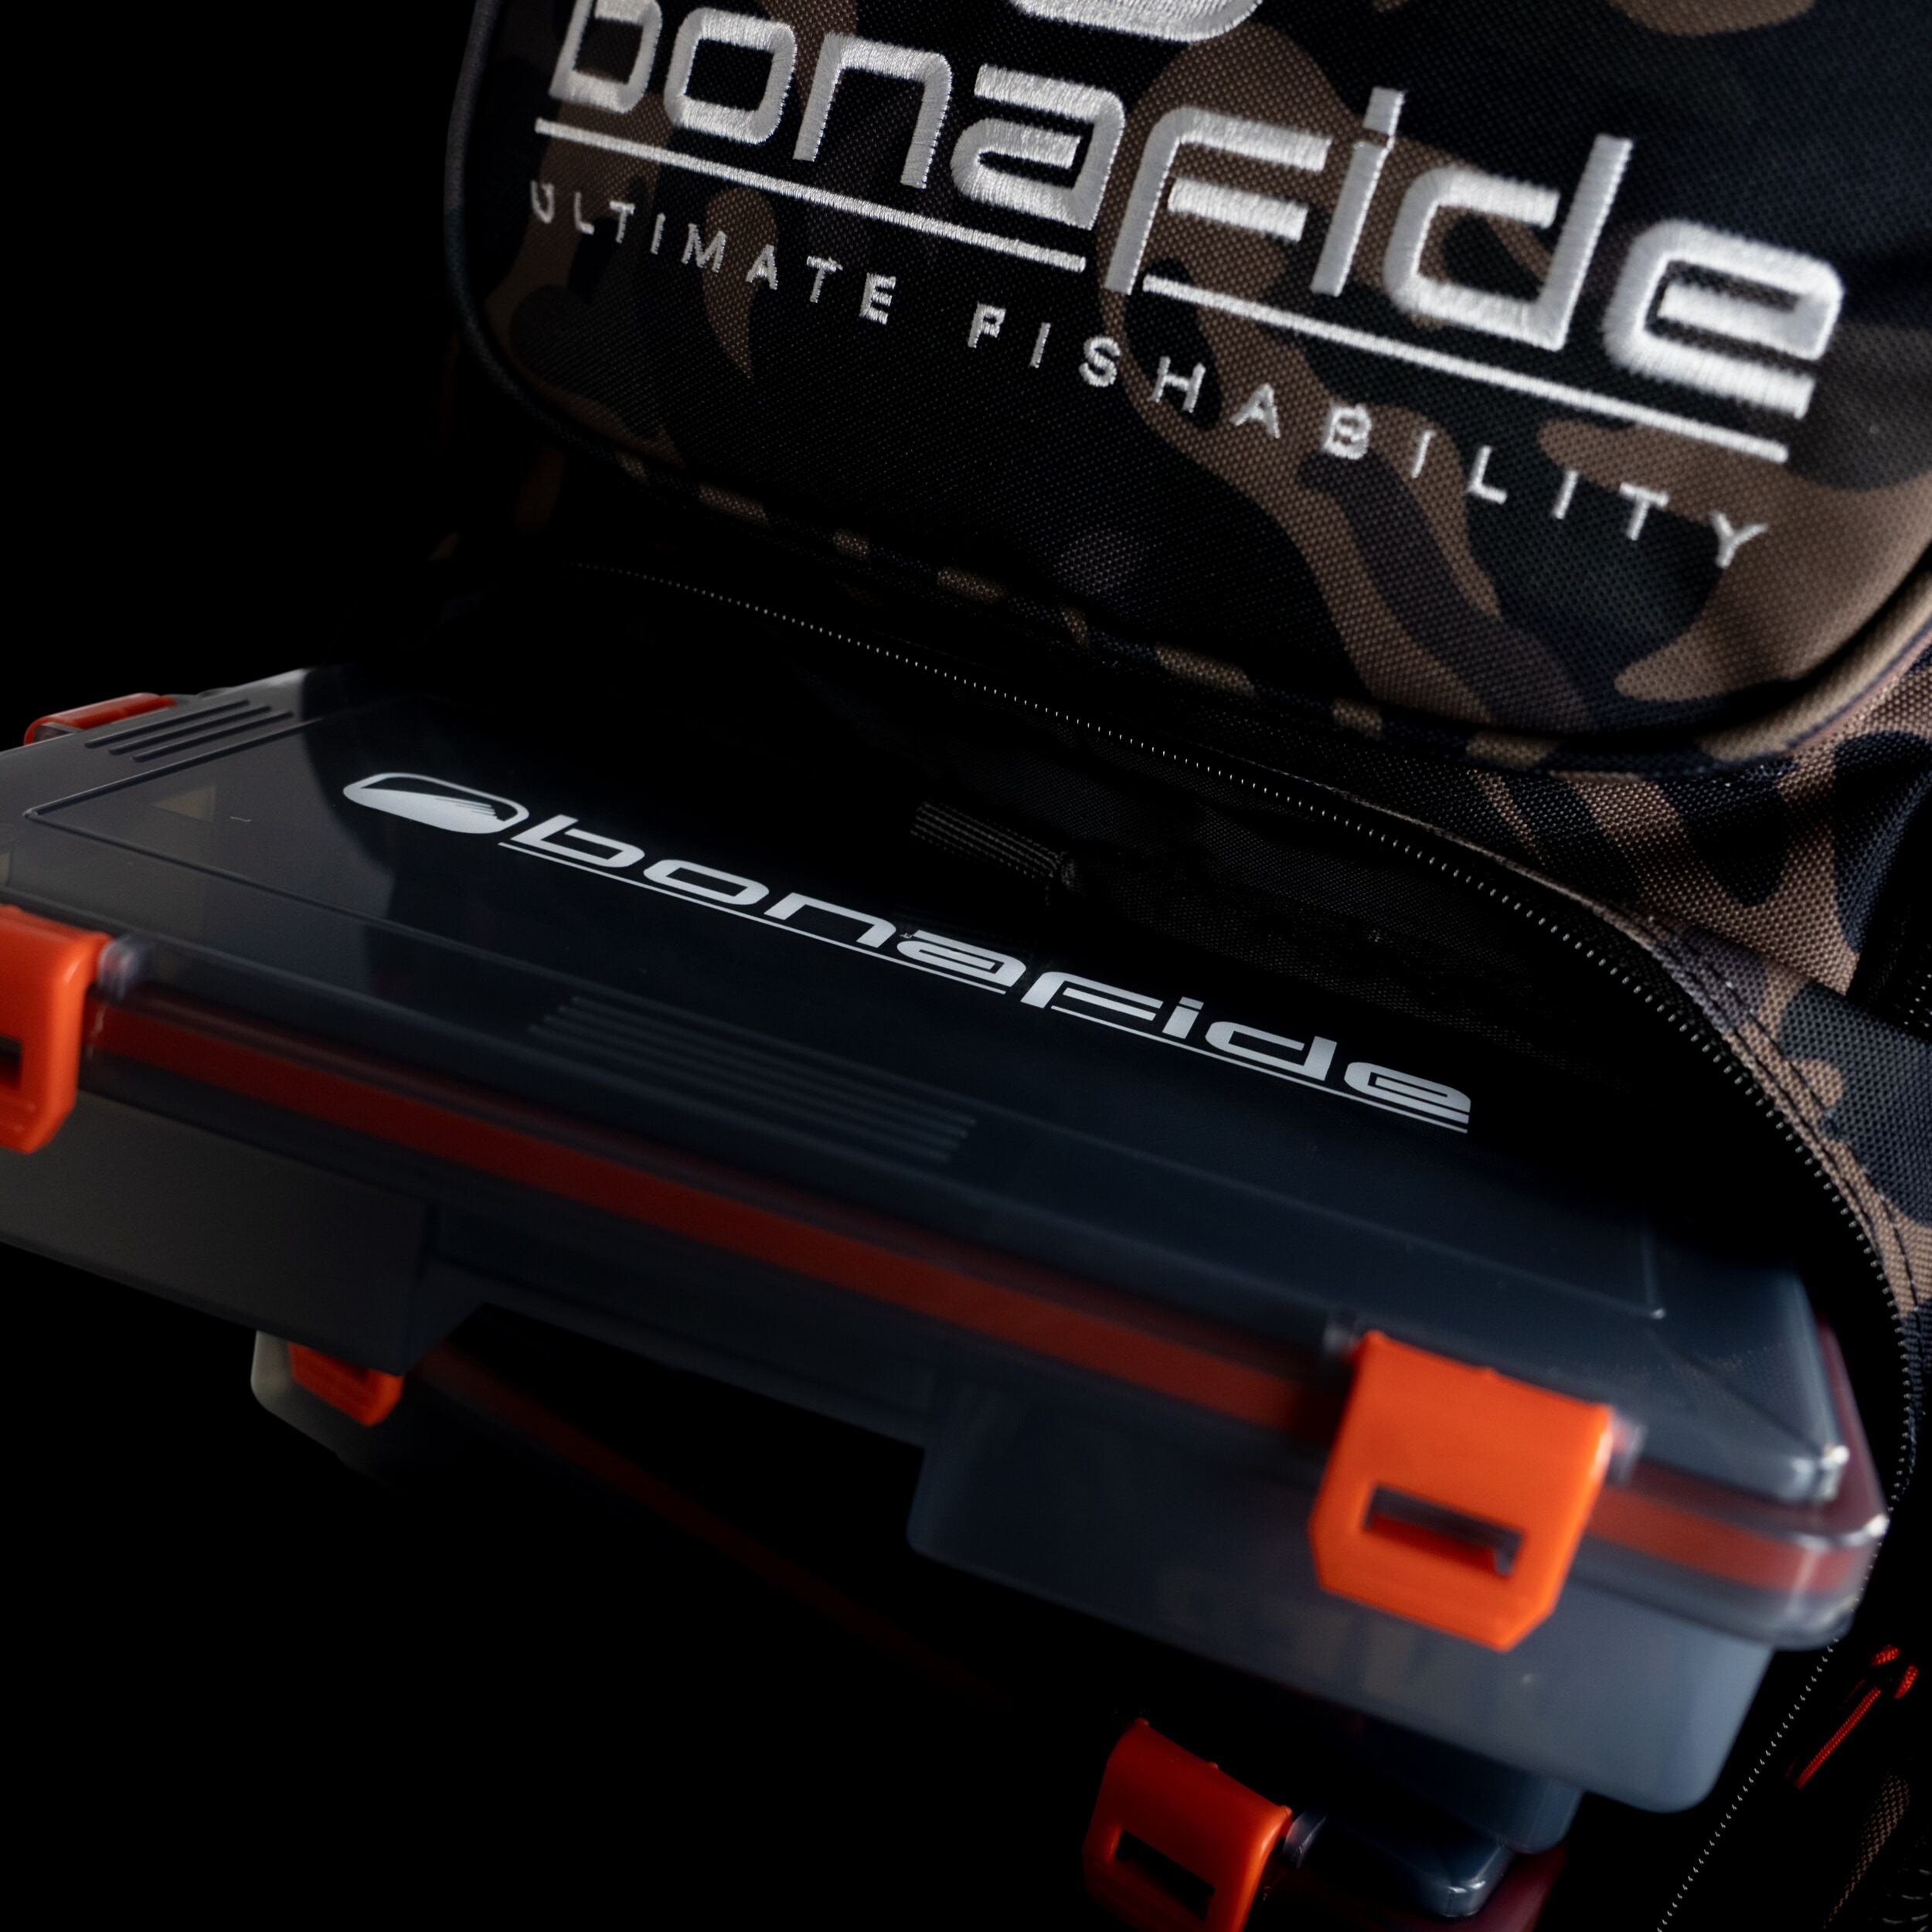 Bonafide Sideline Fishing Bag - Sling with Two 3500 Boxes